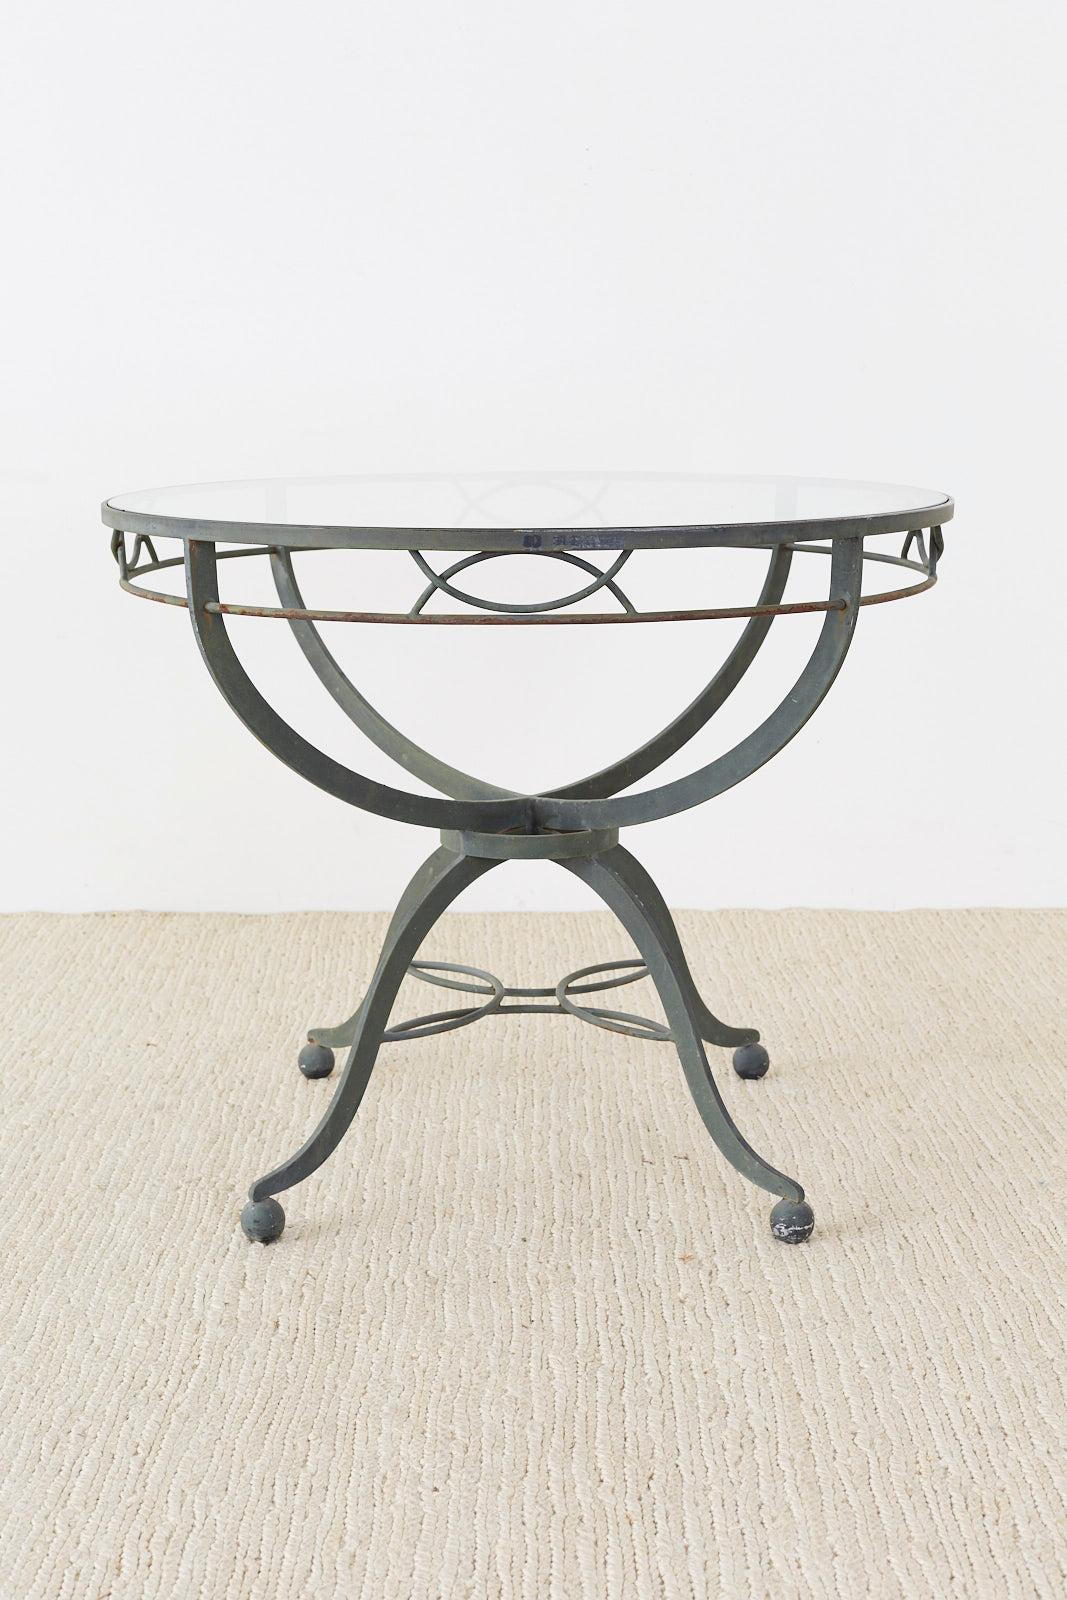 Hand-Crafted Midcentury French Neoclassical Style Iron Garden Dining Table